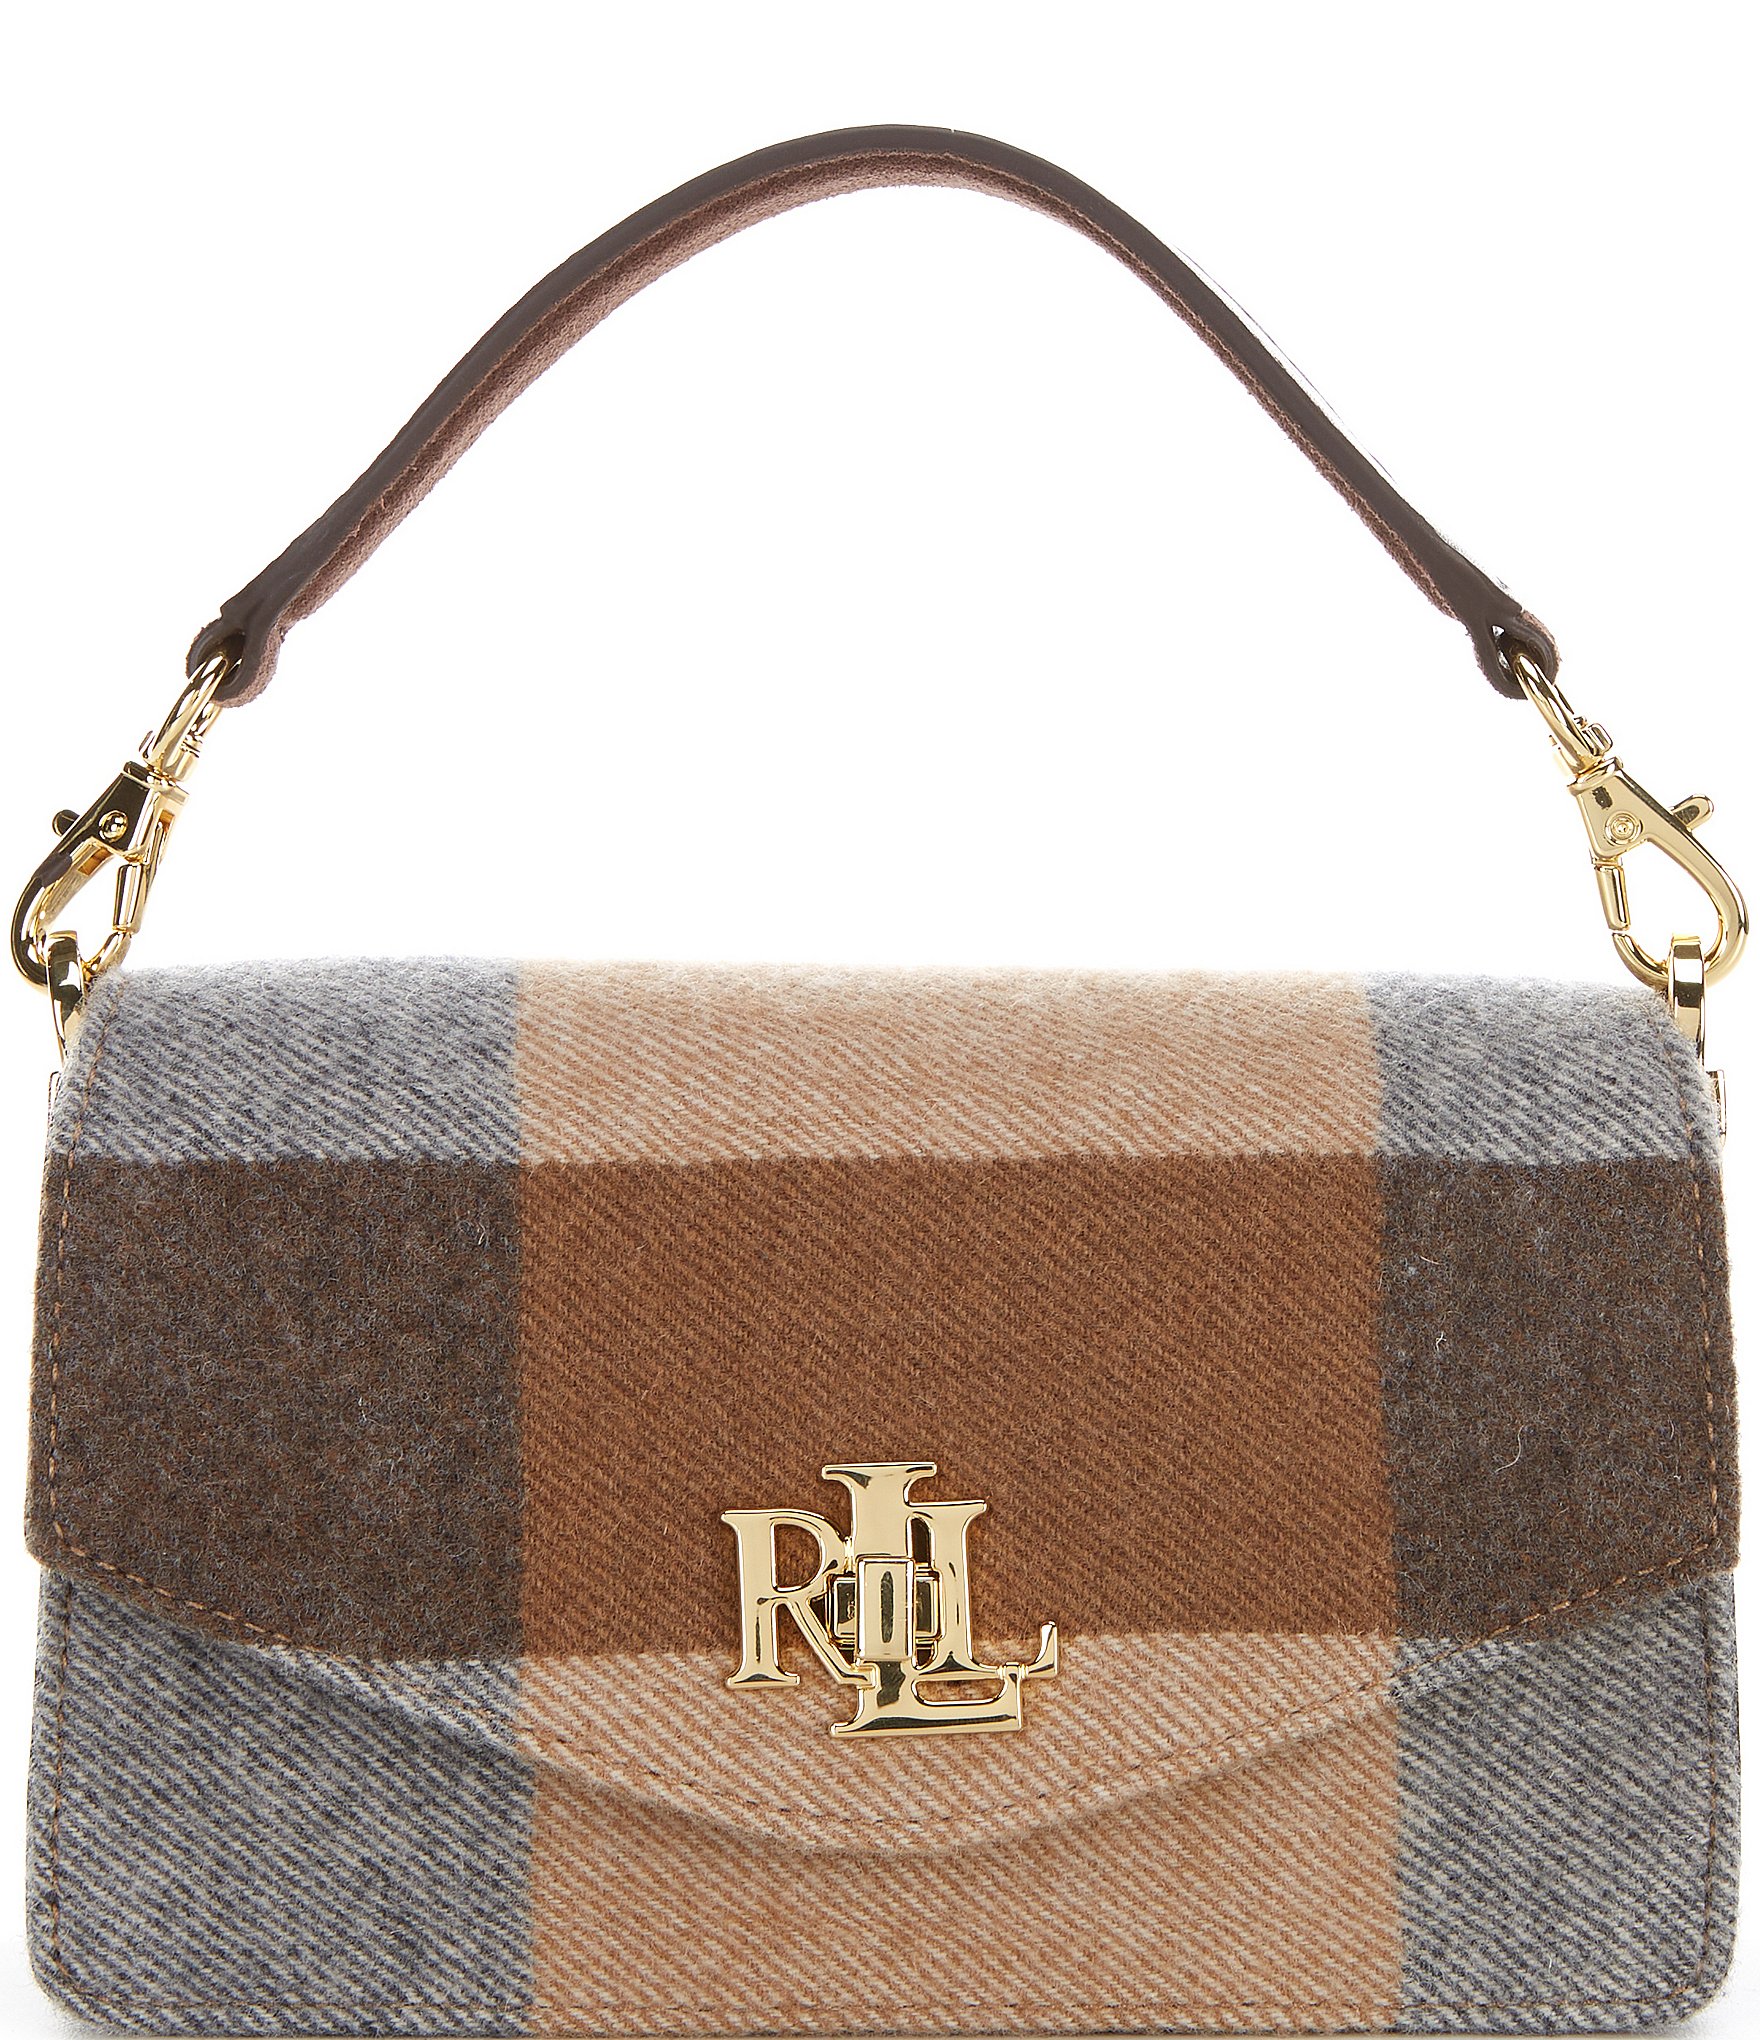 Antonia - Your bag fix. The tan Burberry TB bag is an on-trend